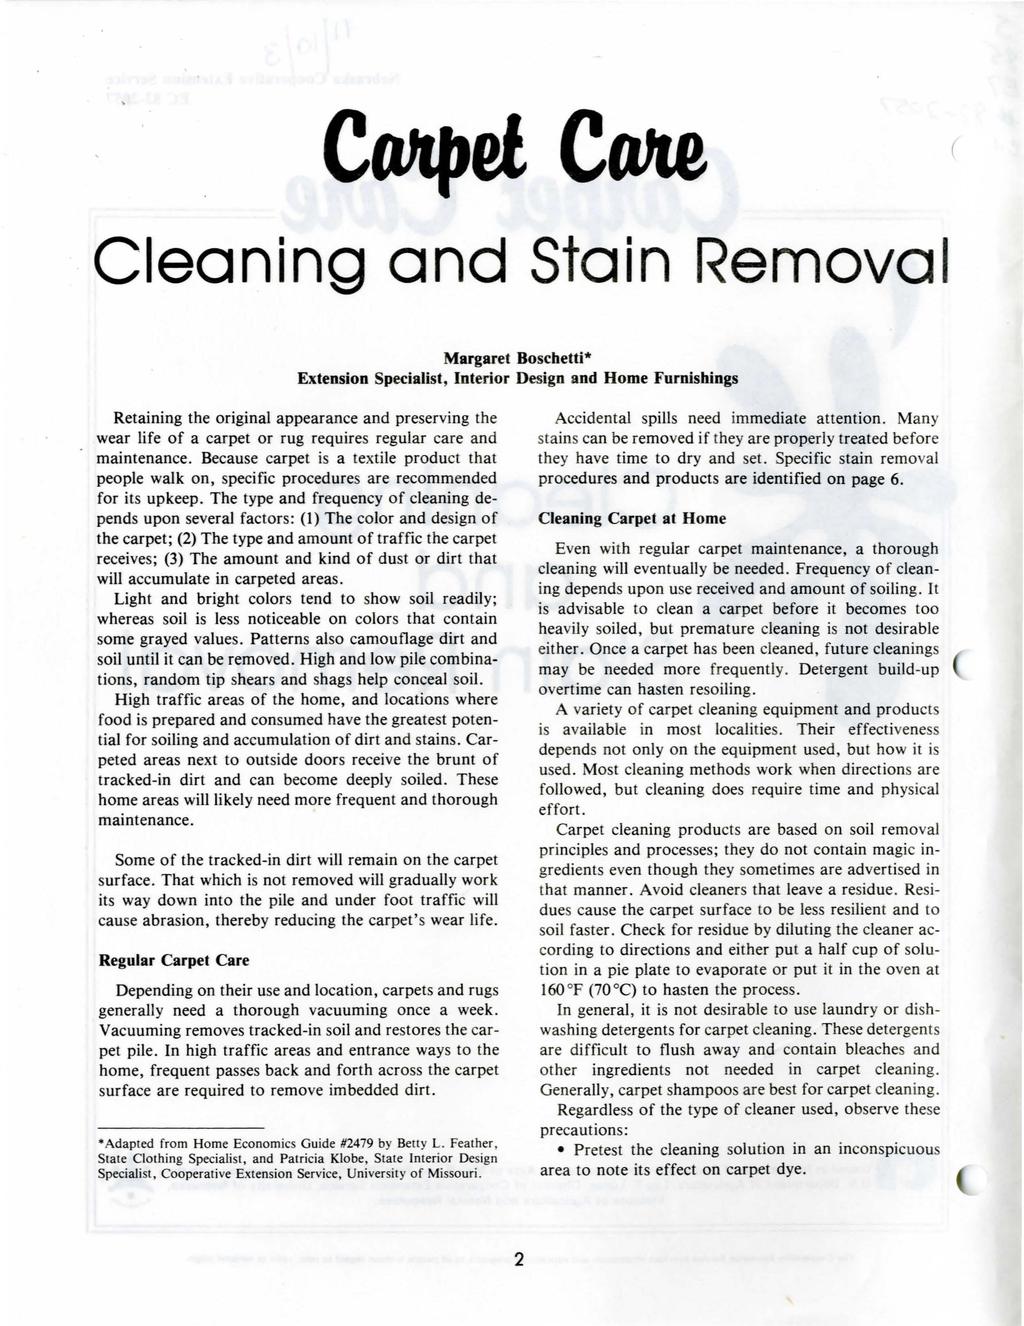 ( Cleaning and Stain Removal Margaret Boscbetti* Extension Specialist, Interior Design and Home Furnishings Retaining the original appearance and preserving the wear life of a carpet or rug requires